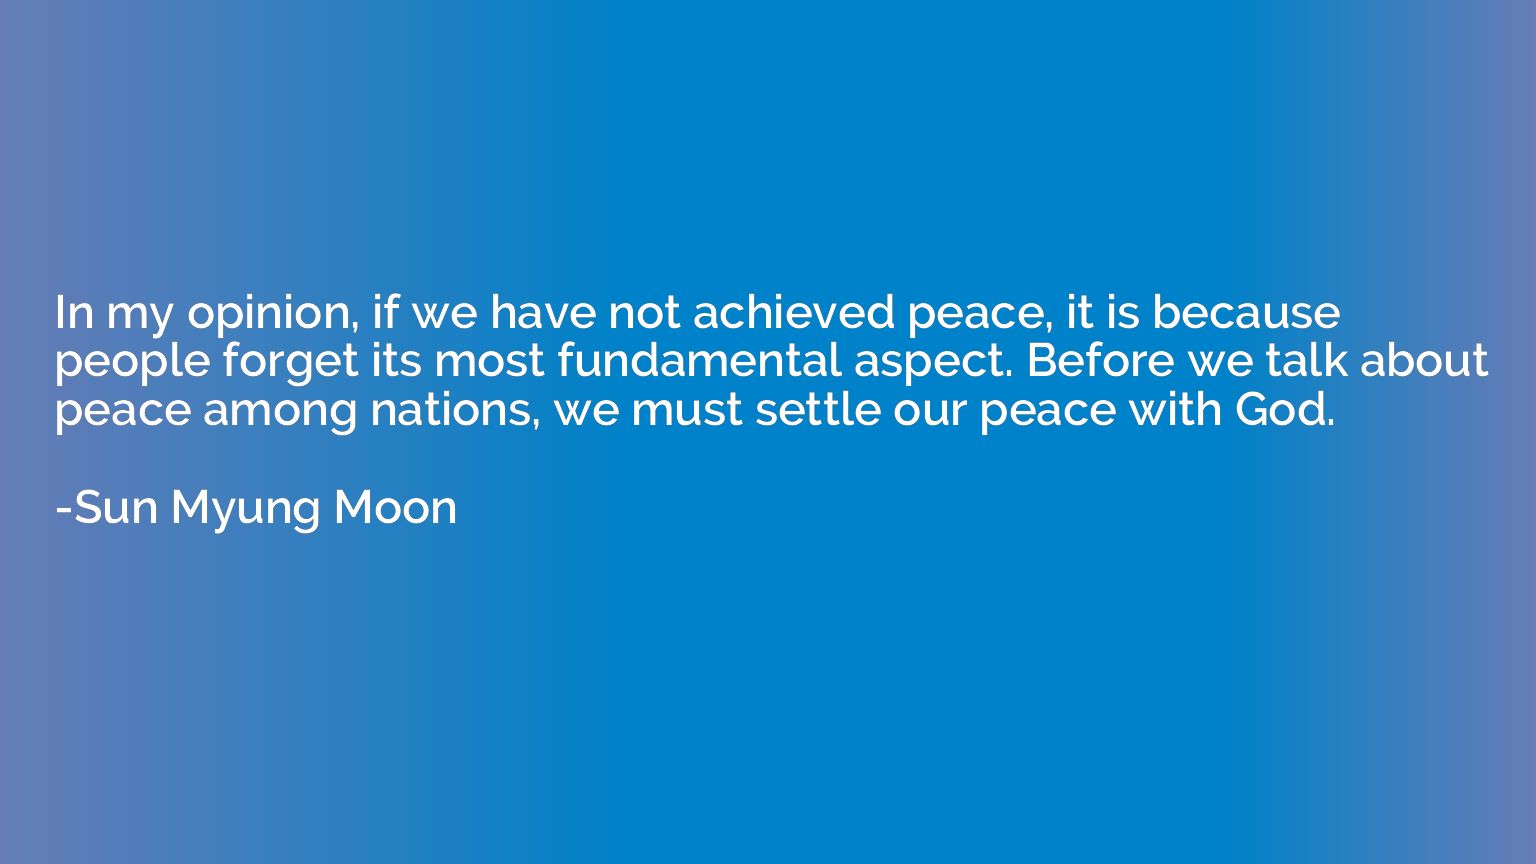 In my opinion, if we have not achieved peace, it is because 